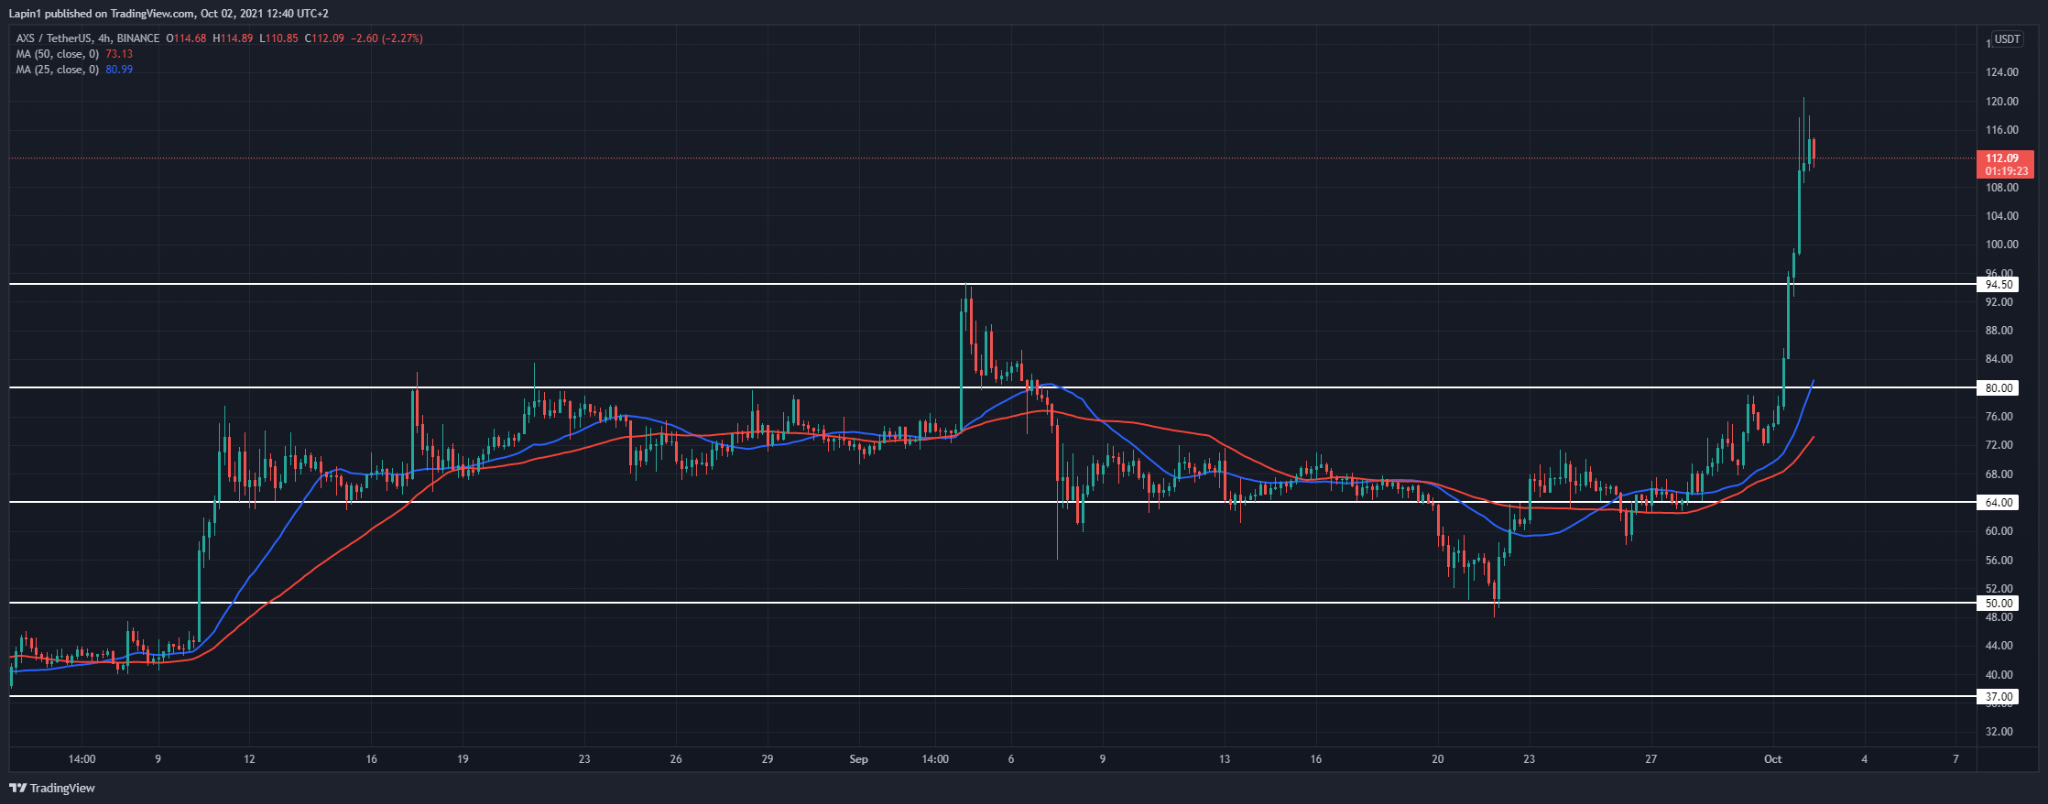 Axie Infinity Price Analysis: AXS spikes to a new all-time high at $120, reversal to follow?